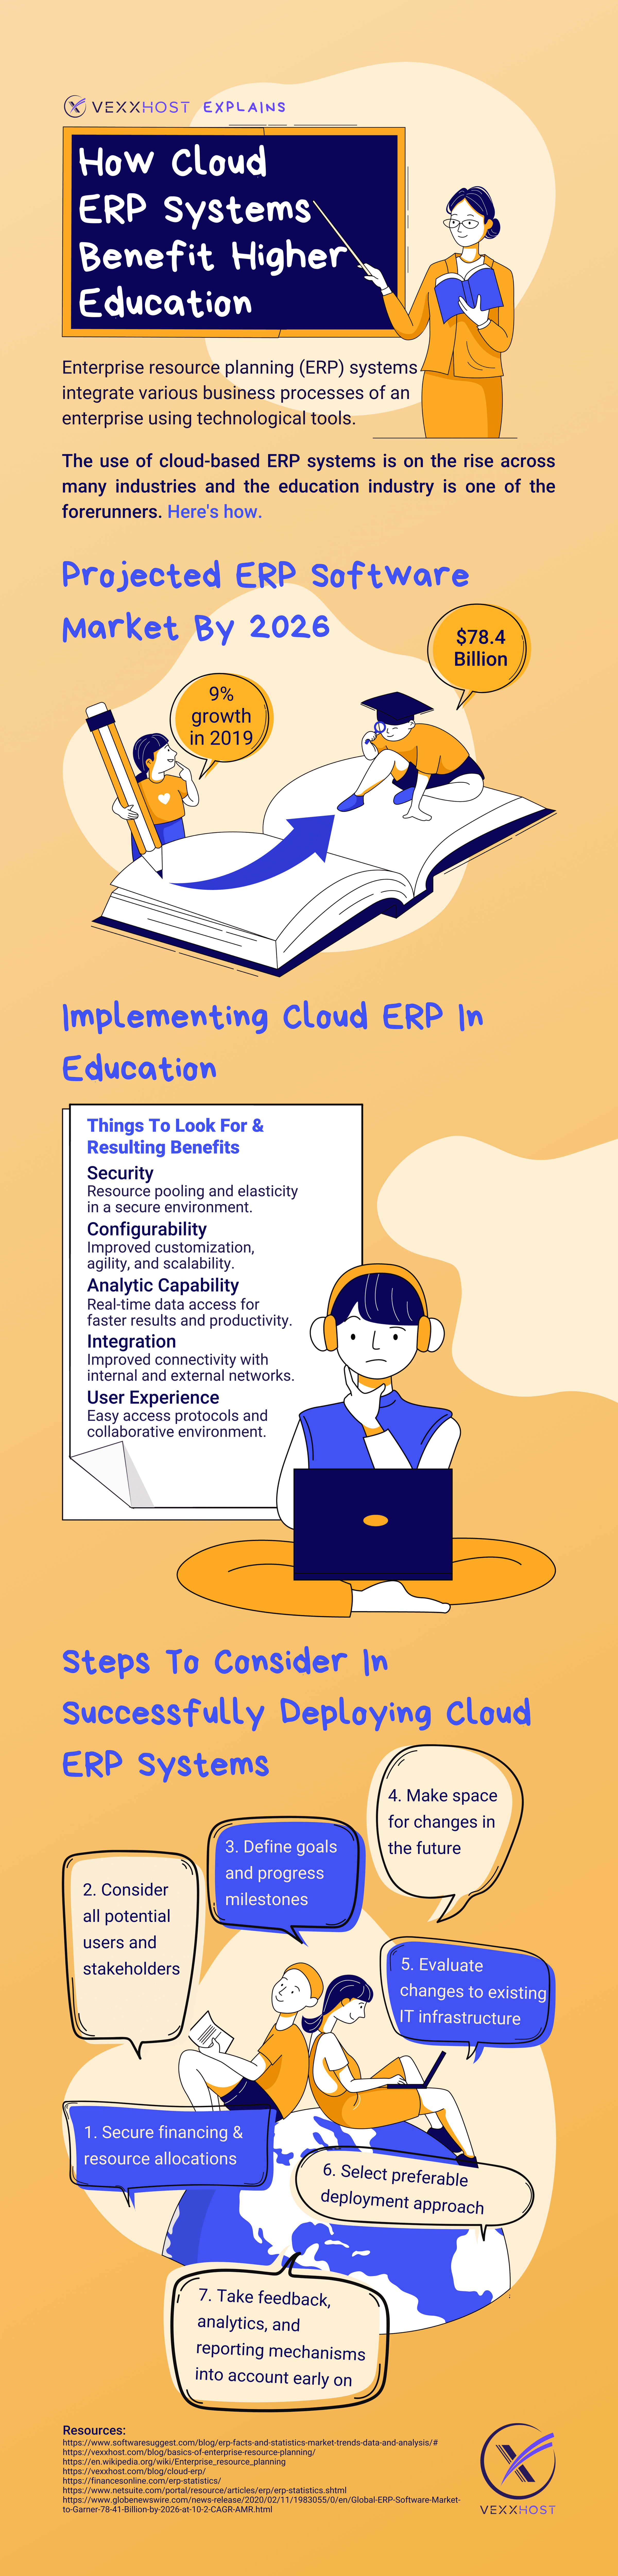 How-Cloud-ERP-Systems-Benefit-Higher-Education